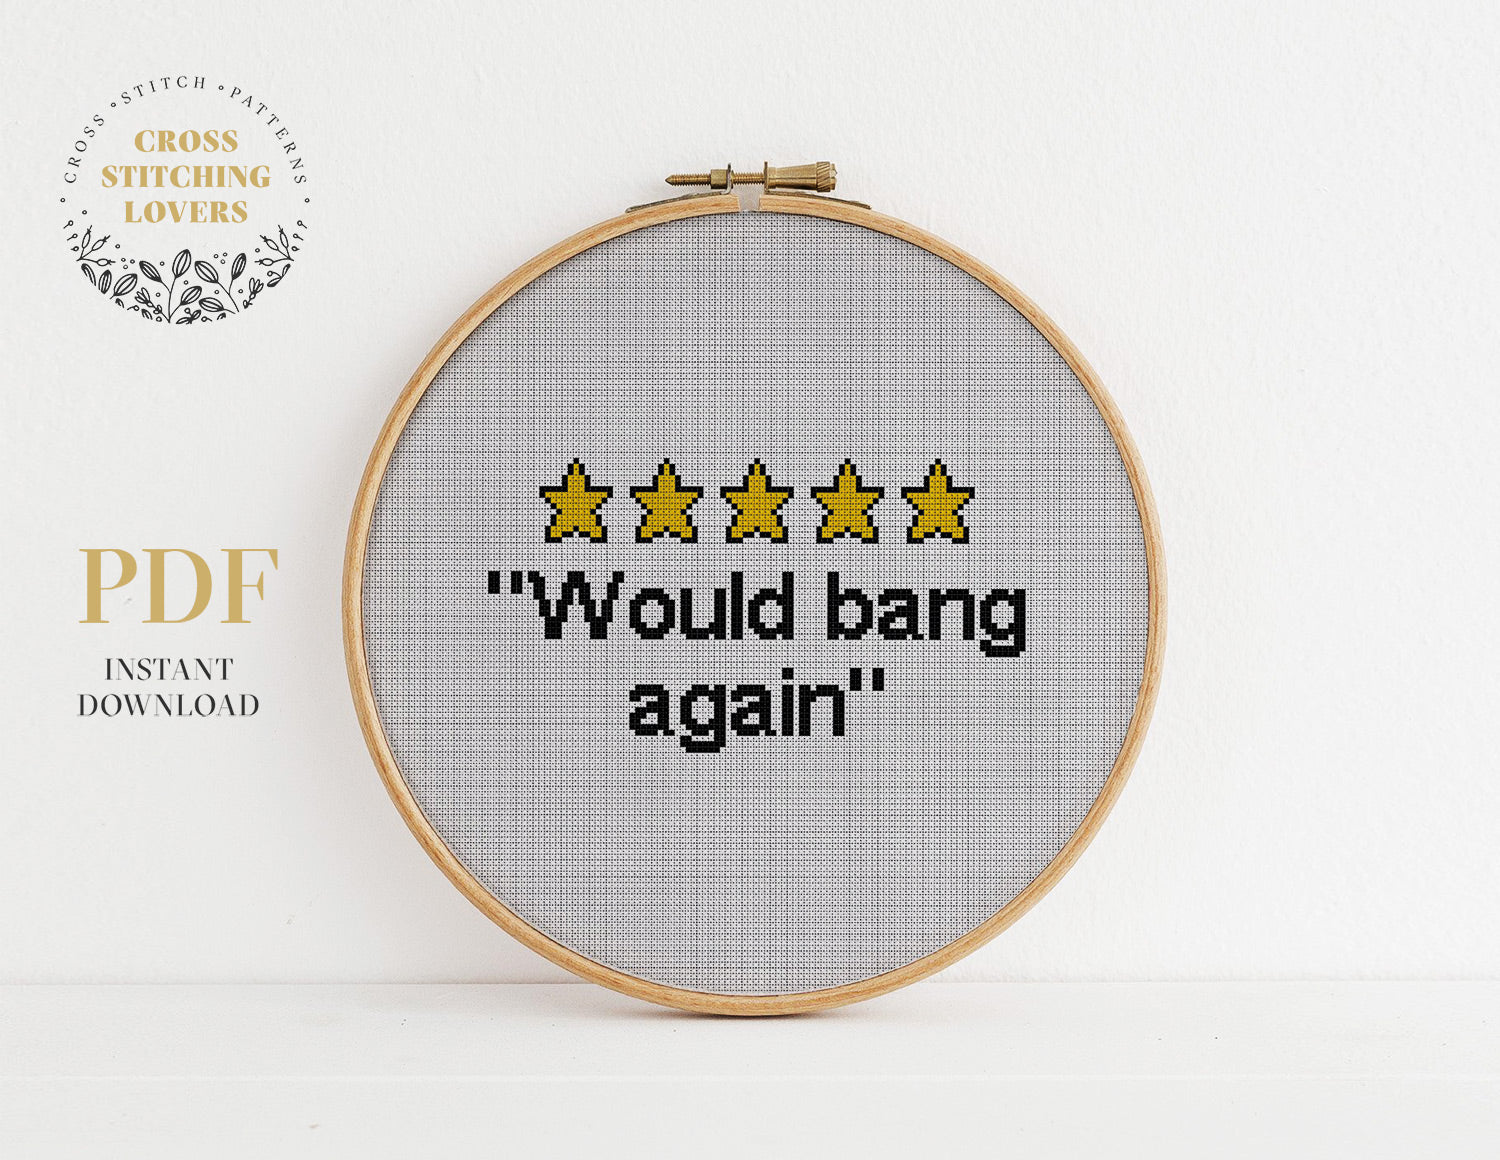 Funny review - Cross stitch pattern